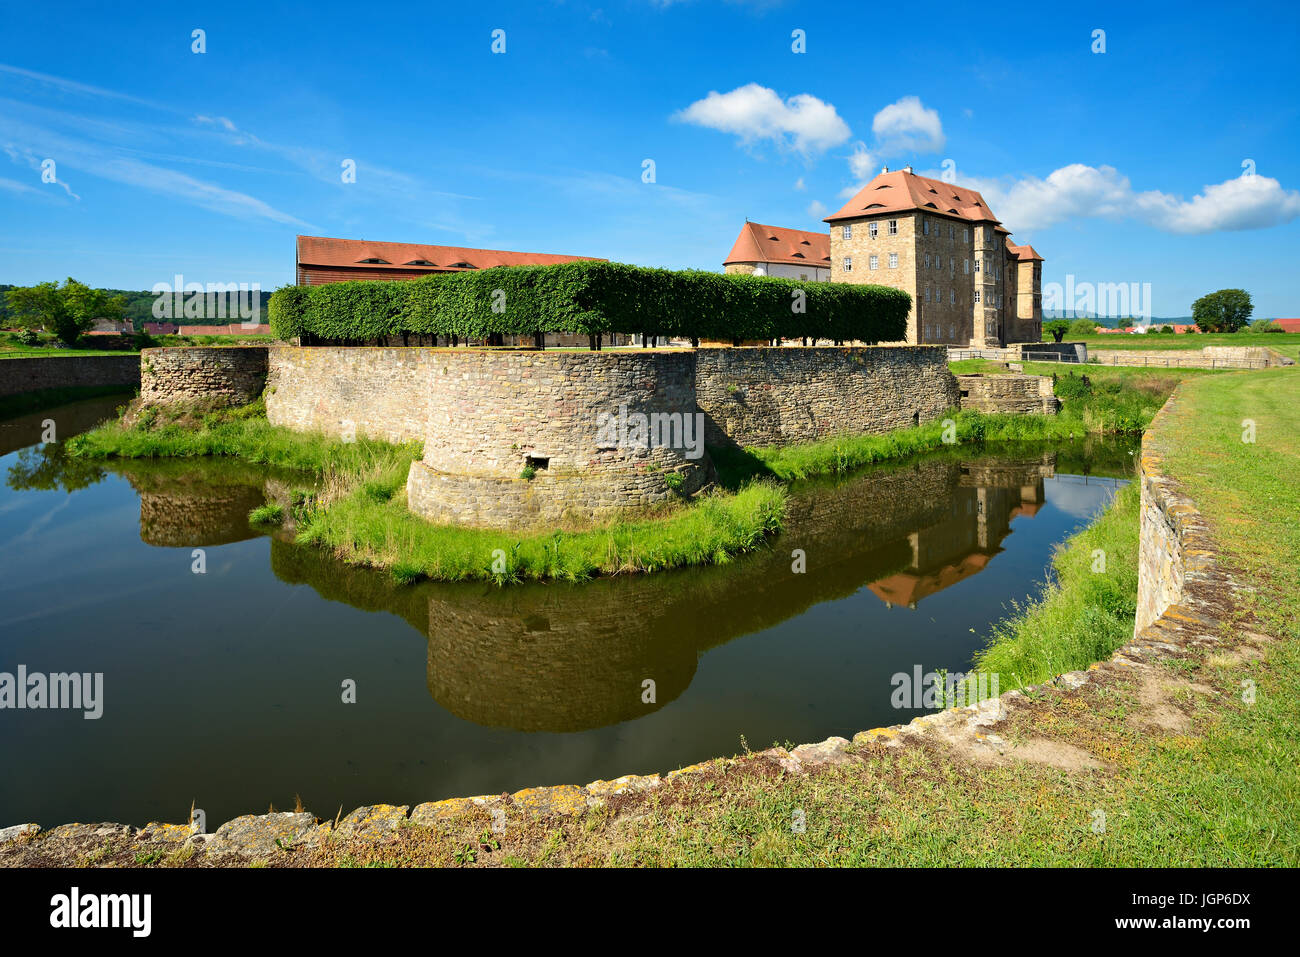 Water castle and fortress Heldrungen, gate building with bastions, exterior moat, at back the Renaissance castle, Heldrungen Stock Photo